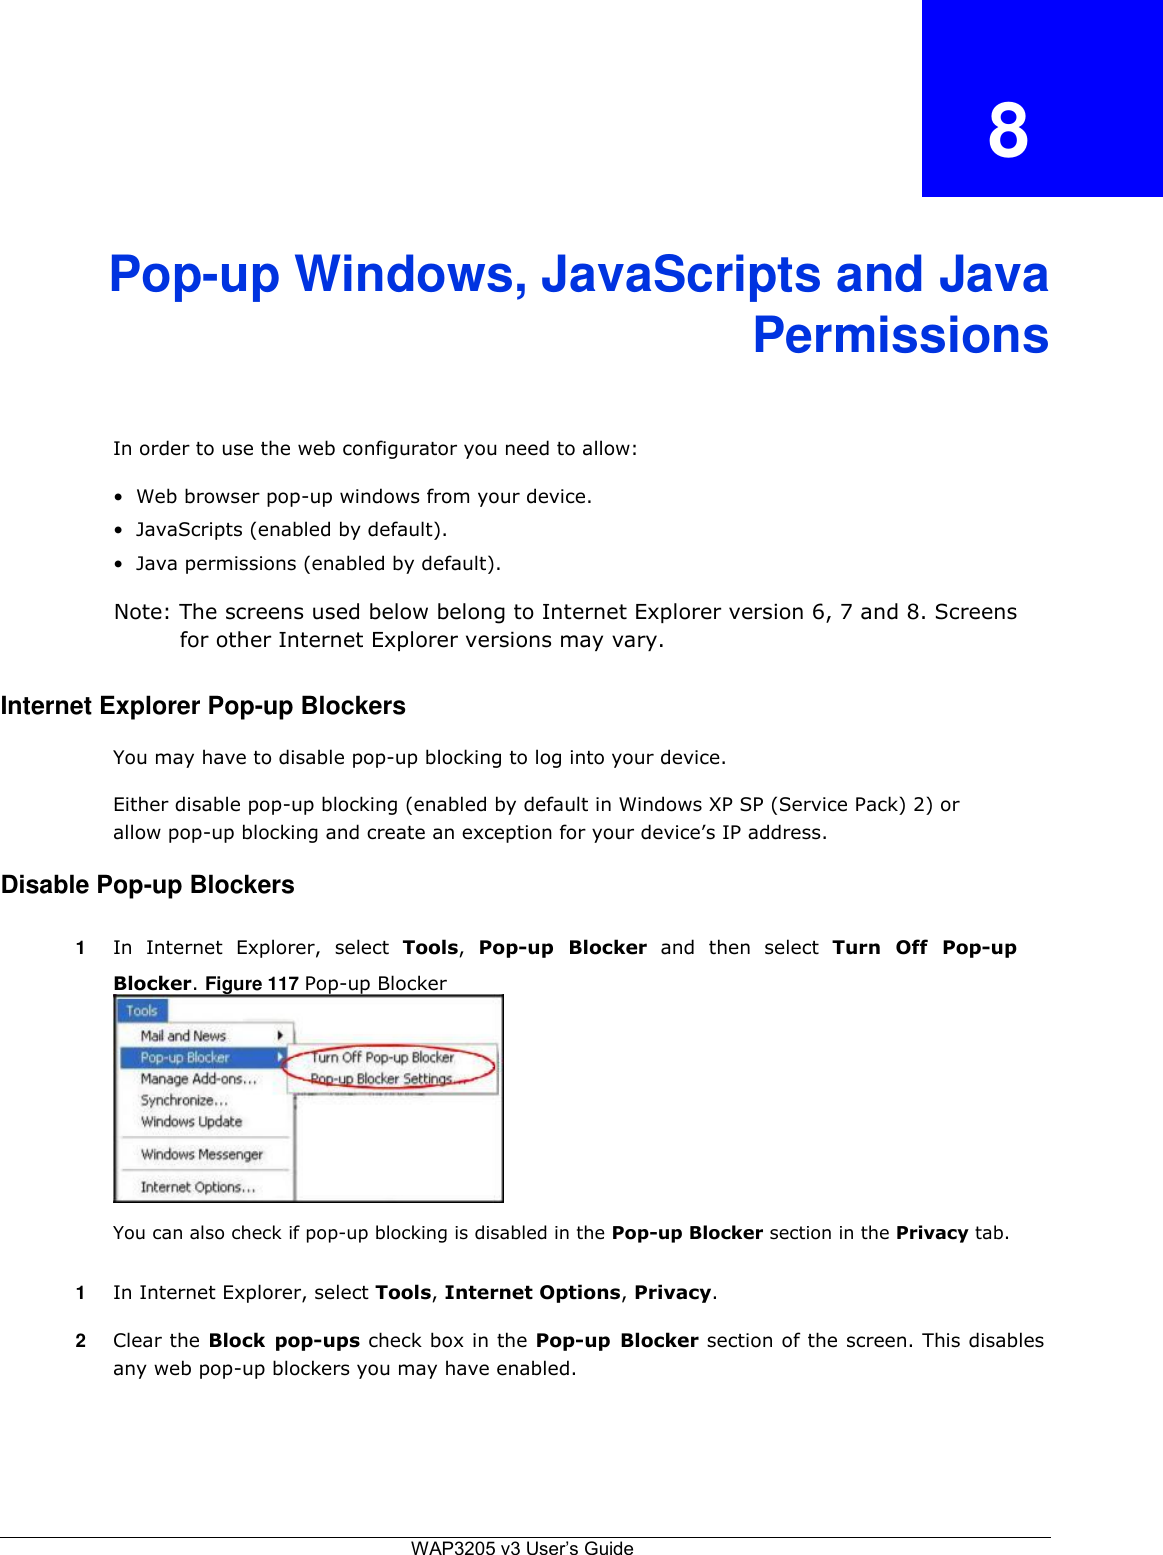   8    Pop-up Windows, JavaScripts and Java  Permissions    In order to use the web configurator you need to allow:  • Web browser pop-up windows from your device.  • JavaScripts (enabled by default).  • Java permissions (enabled by default).  Note: The screens used below belong to Internet Explorer version 6, 7 and 8. Screens for other Internet Explorer versions may vary.  Internet Explorer Pop-up Blockers  You may have to disable pop-up blocking to log into your device.  Either disable pop-up blocking (enabled by default in Windows XP SP (Service Pack) 2) or allow pop-up blocking and create an exception for your device’s IP address.  Disable Pop-up Blockers  1  In  Internet  Explorer,  select  Tools,  Pop-up  Blocker  and  then  select  Turn  Off  Pop-up Blocker. Figure 117 Pop-up Blocker           You can also check if pop-up blocking is disabled in the Pop-up Blocker section in the Privacy tab.  1  In Internet Explorer, select Tools, Internet Options, Privacy.  2  Clear the Block  pop-ups check box in the Pop-up  Blocker section of the screen. This disables any web pop-up blockers you may have enabled.        WAP3205 v3 User’s Guide 